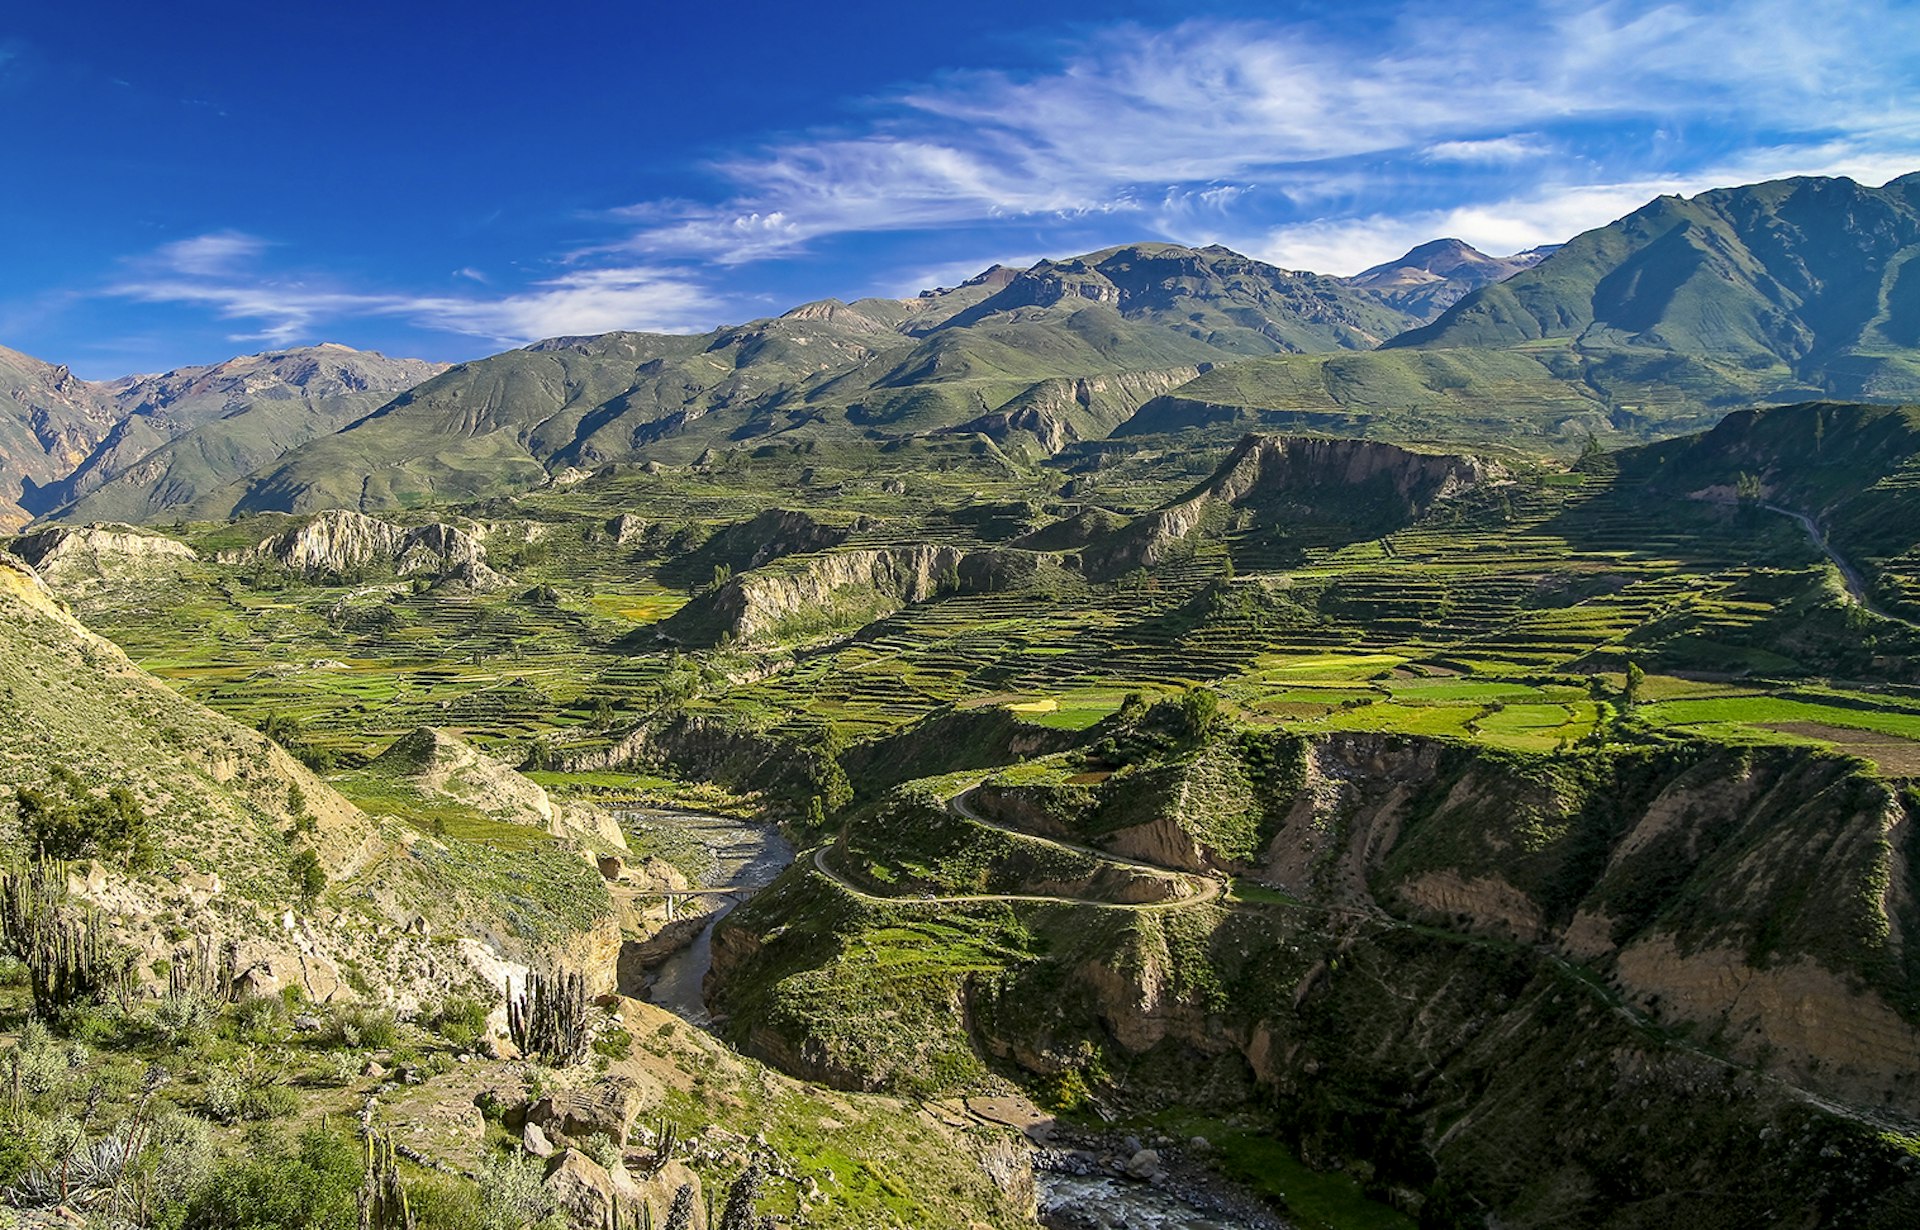 The view from one end of the Colca Canyon floor, covered in green crass and Inca-era farming terraces